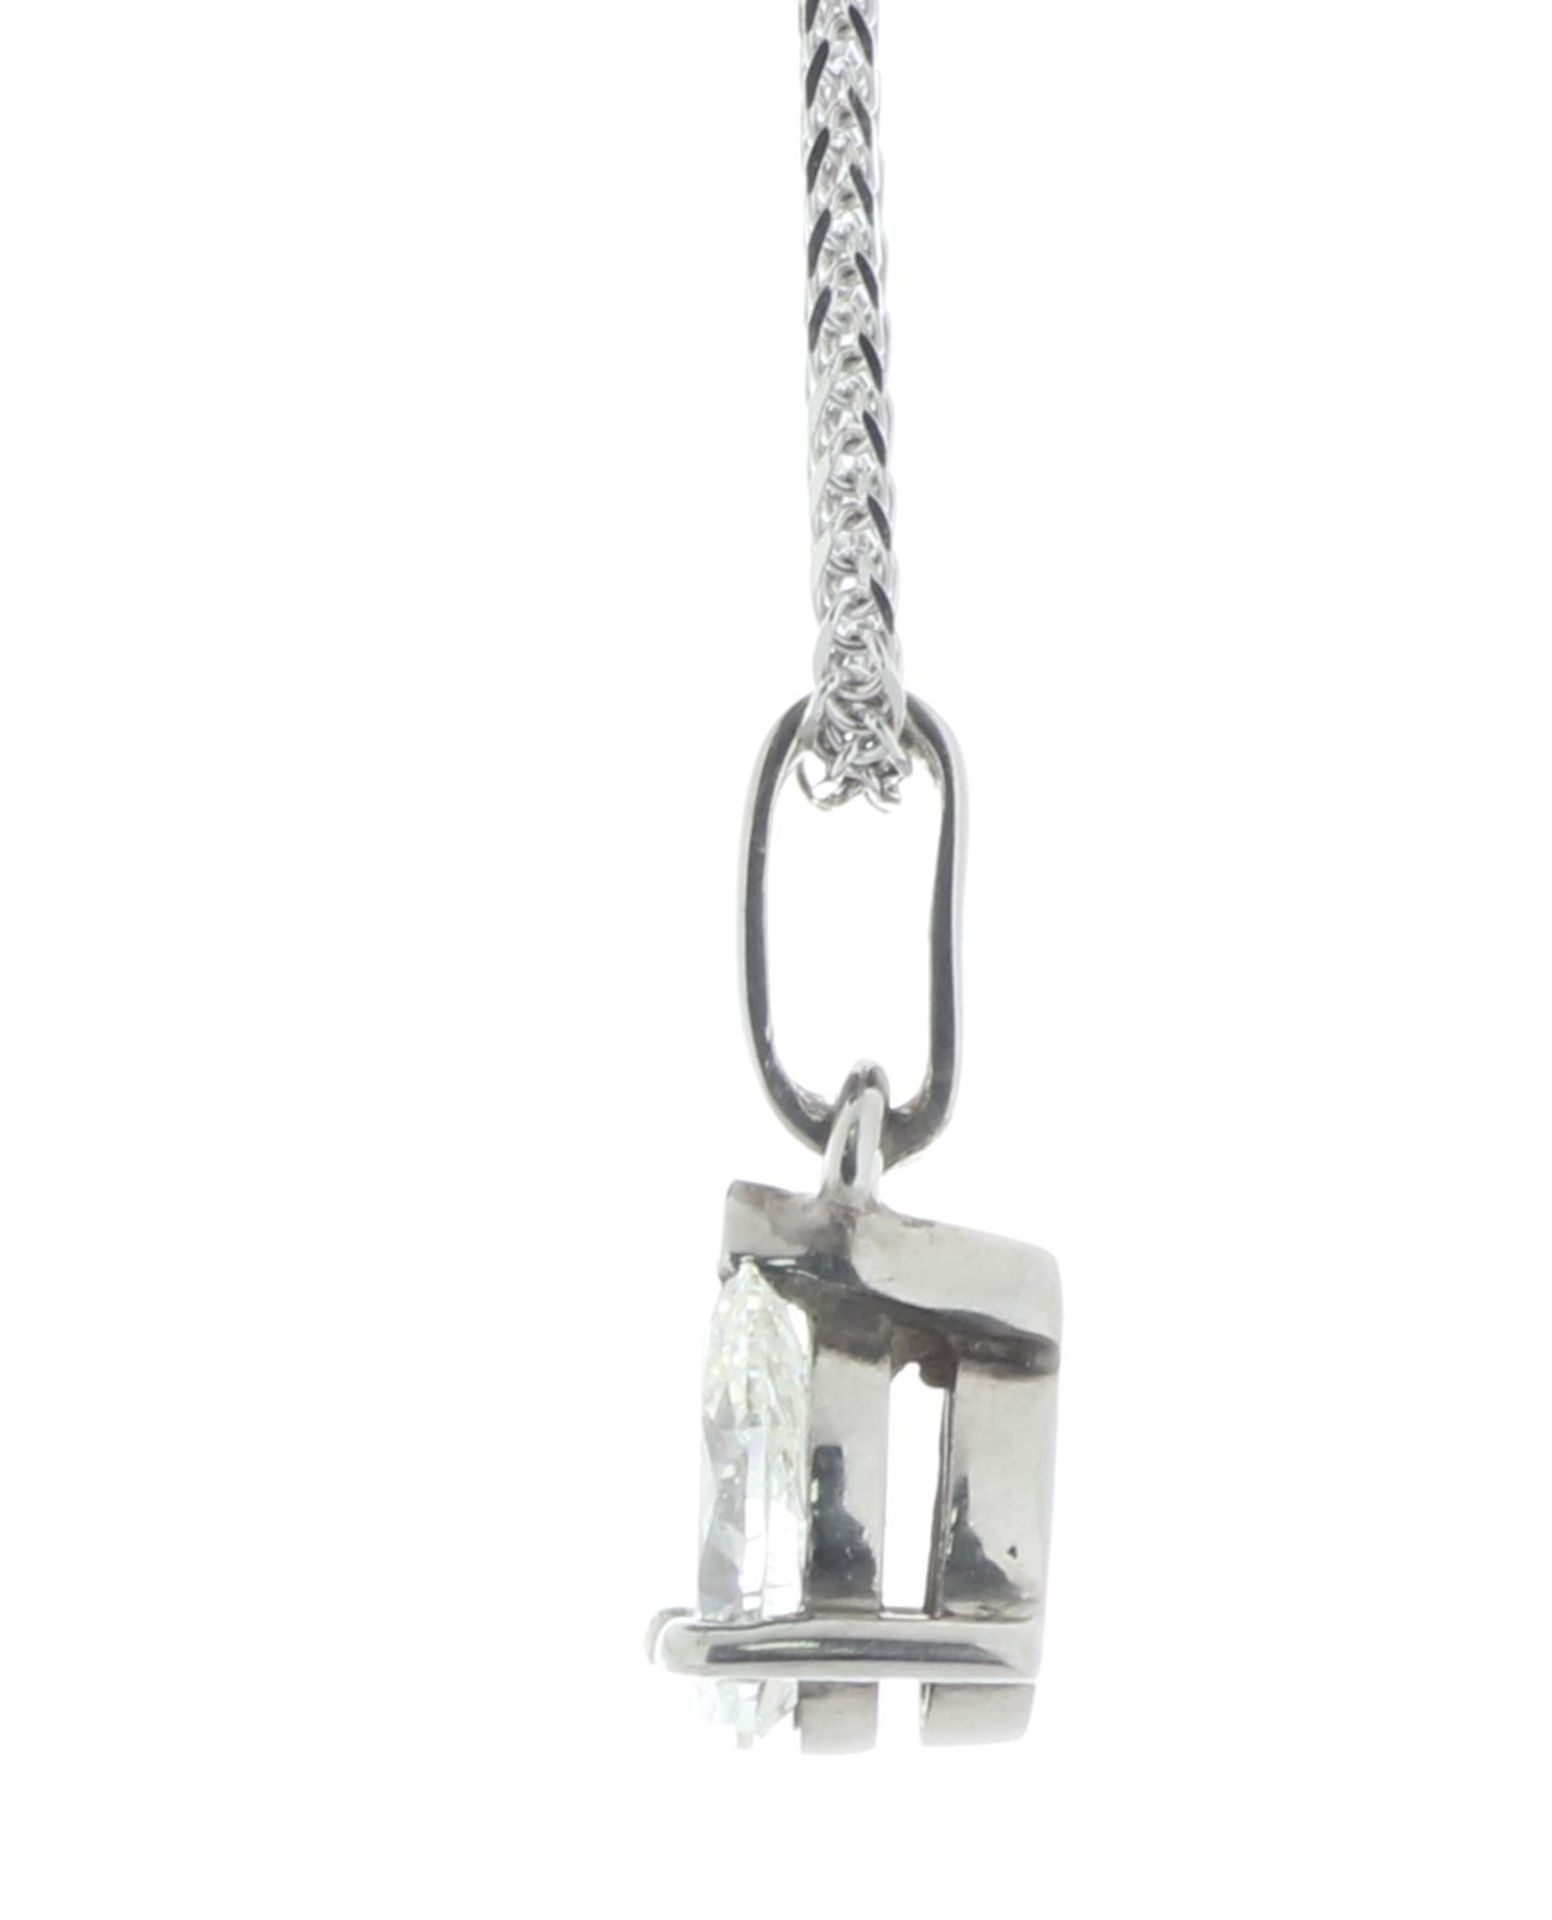 9ct White Gold Pear Shaped Diamond Pendant and 18" Chain 0.90 Carats - Valued By AGI £6,210.00 - One - Image 2 of 3